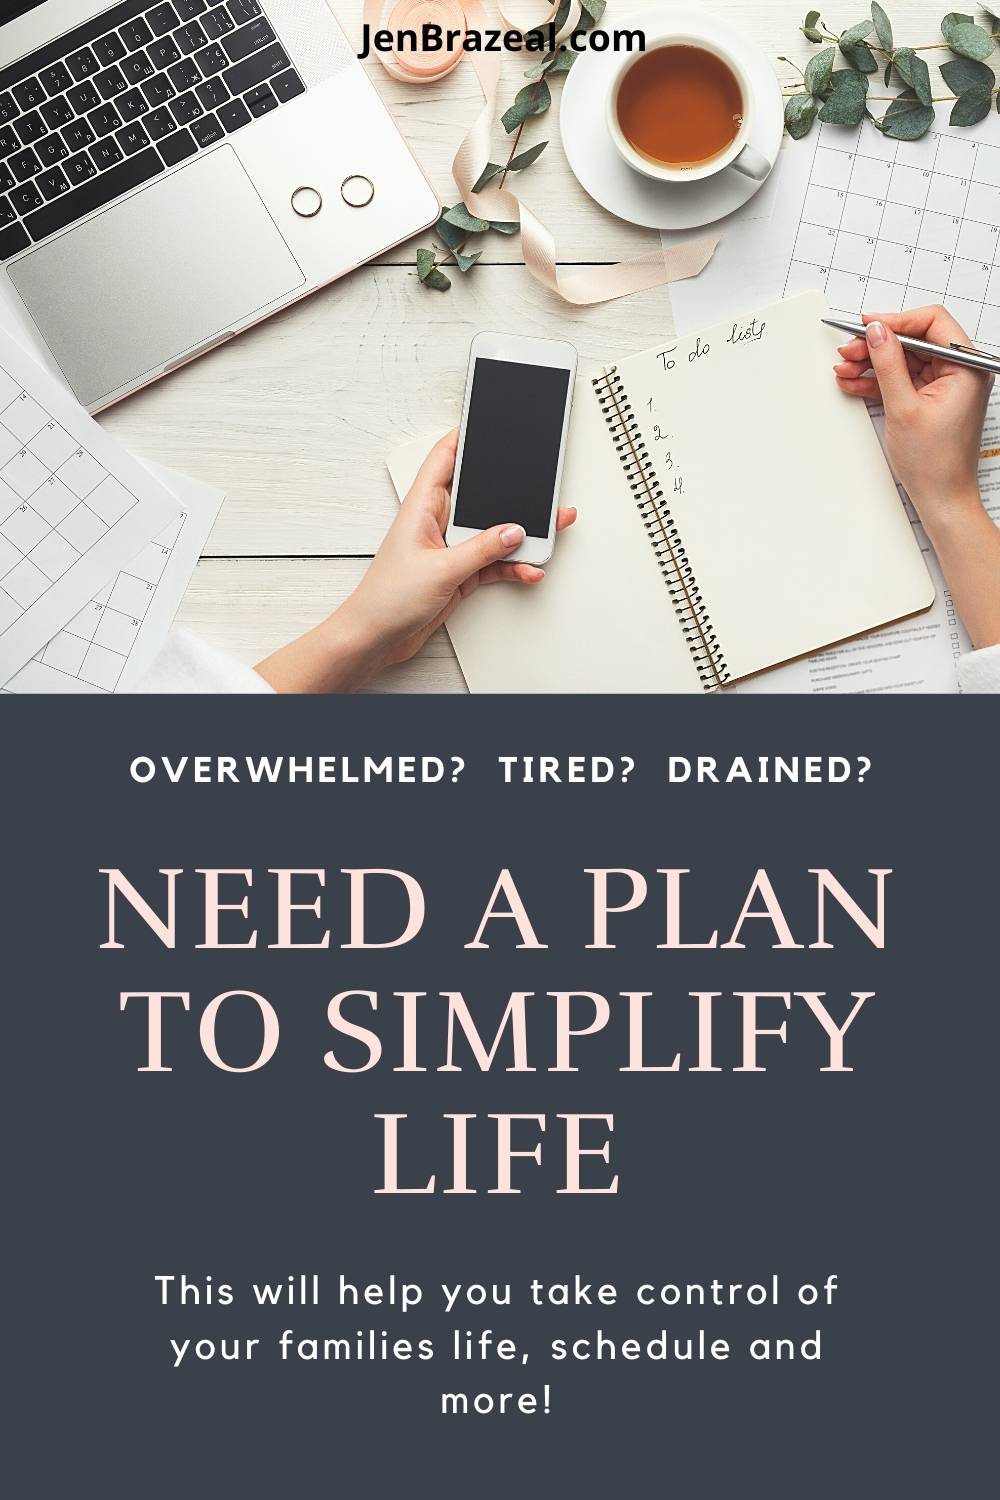 Need a plan to simplify life? Check out this episode of The Unhurried Life Podcast with Somer Phoebus!